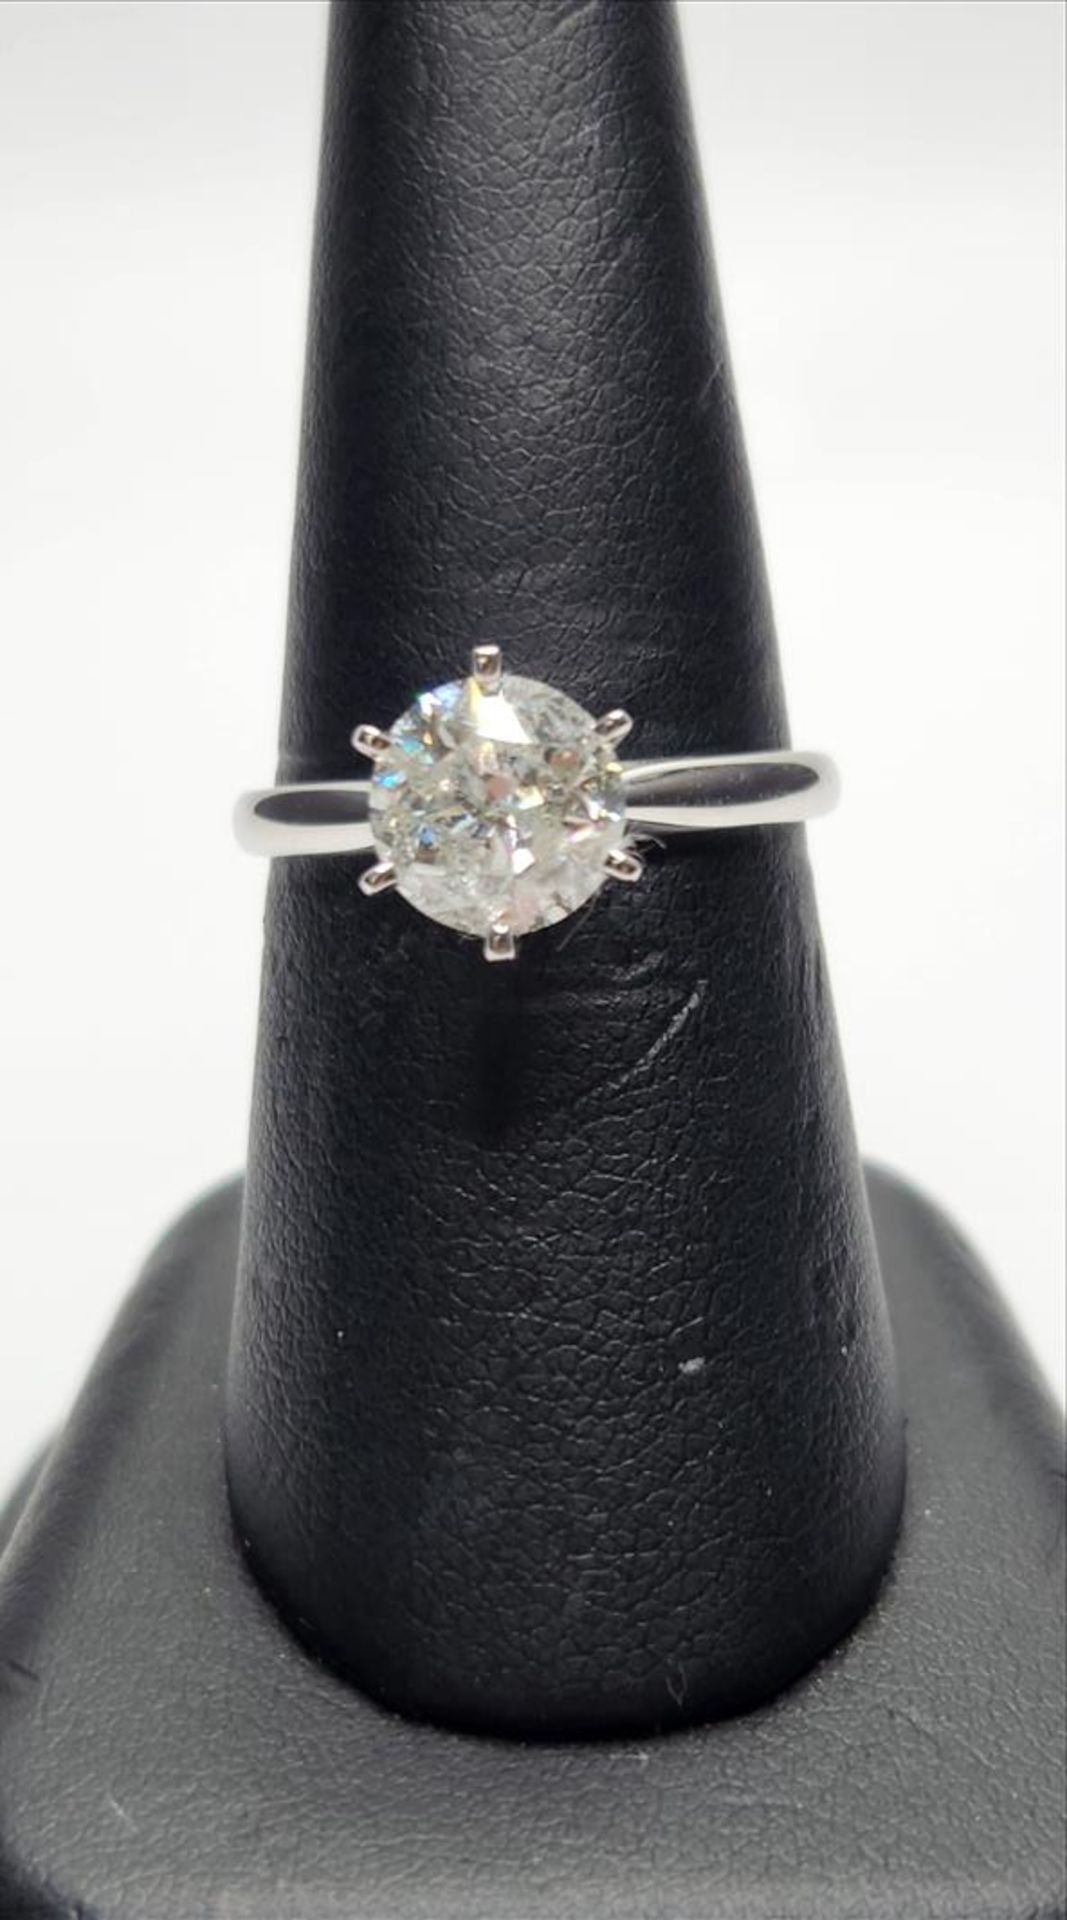 One lady’s stamped and tested 14kt white gold diamond solitaire engagement ring trademarked by Charm - Image 5 of 7